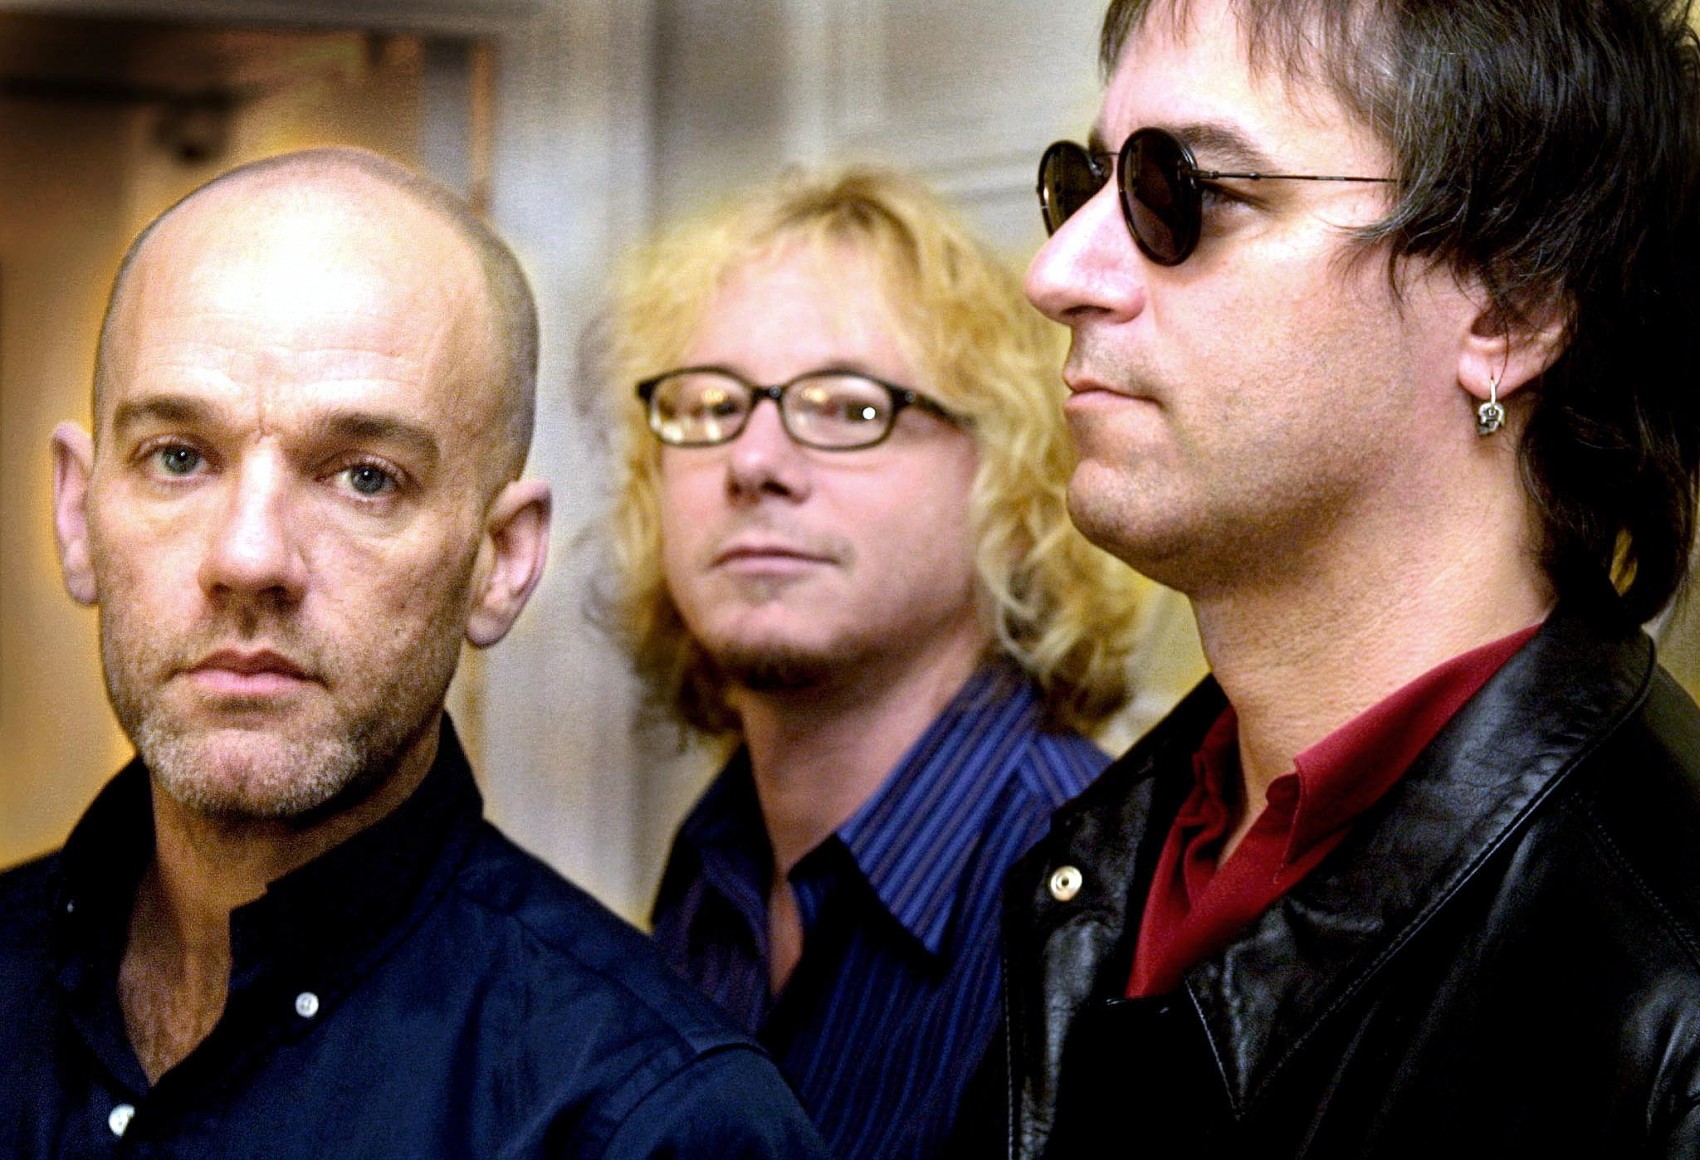 LONDON, UNITED KINGDOM:  Members of the American rock group R.E.M from L Michael Stipe, Mike Mills and Peter Buck poses for media during a photocall in London, 27 April 2001. The group are in London to promote their newly released album and to play at the Freedom day concert at Trafalgar square, 29 April. AFP/Odd ANDERSEN (Photo credit should read Odd Andersen/AFP/Getty Images)